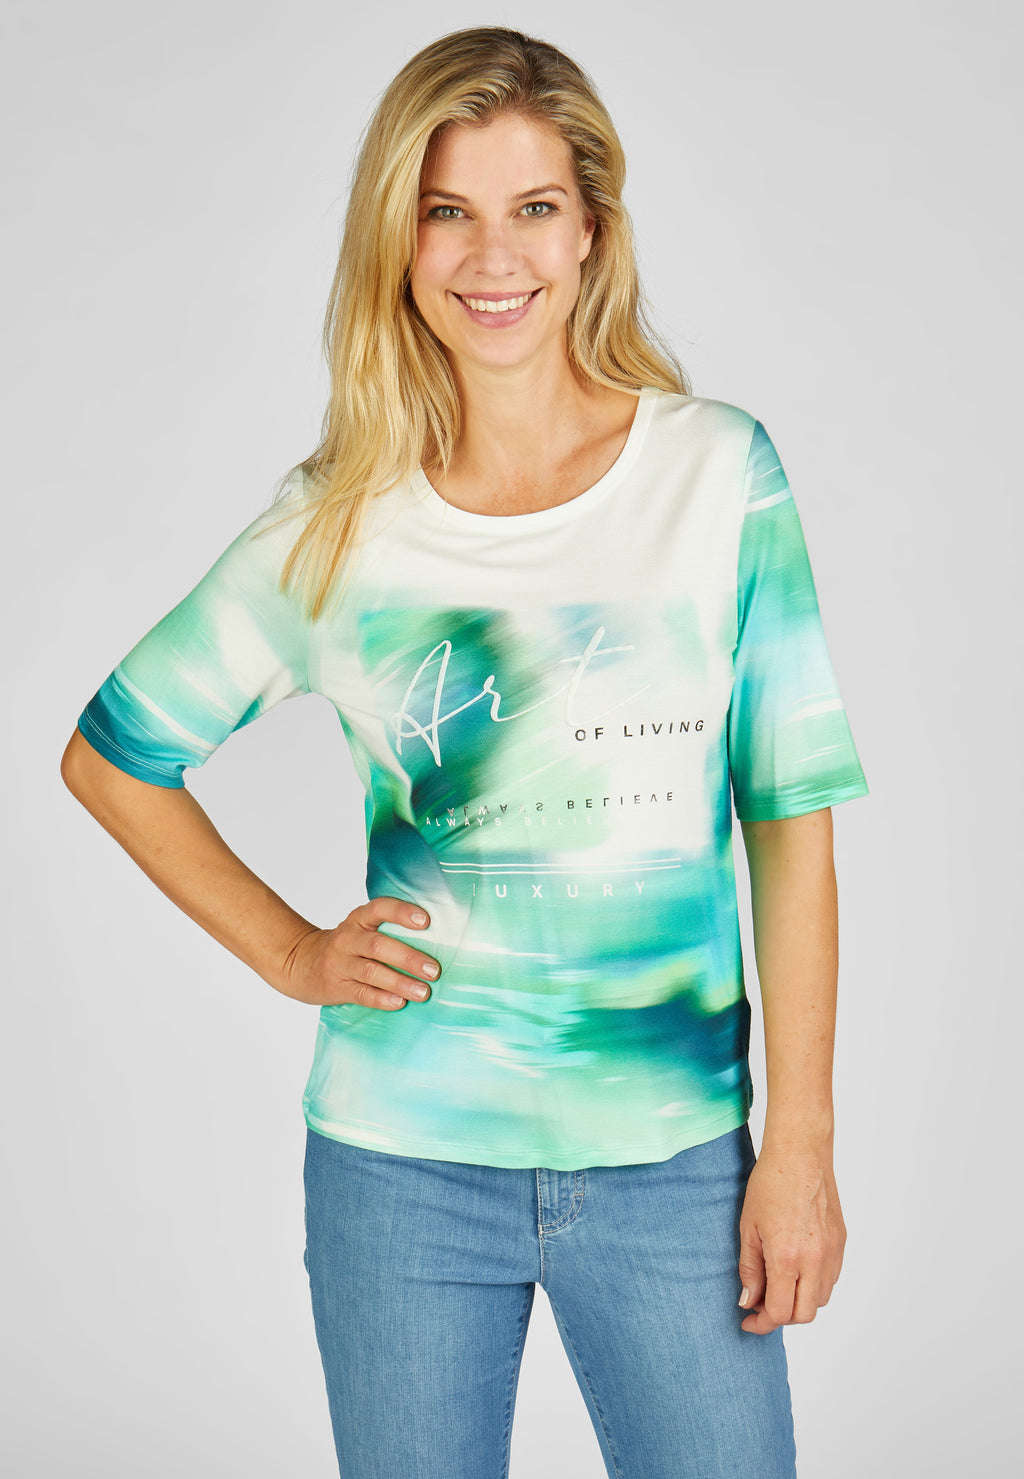 Rabe street cafe collection watercolour printed top in white and green, product code 52-214350